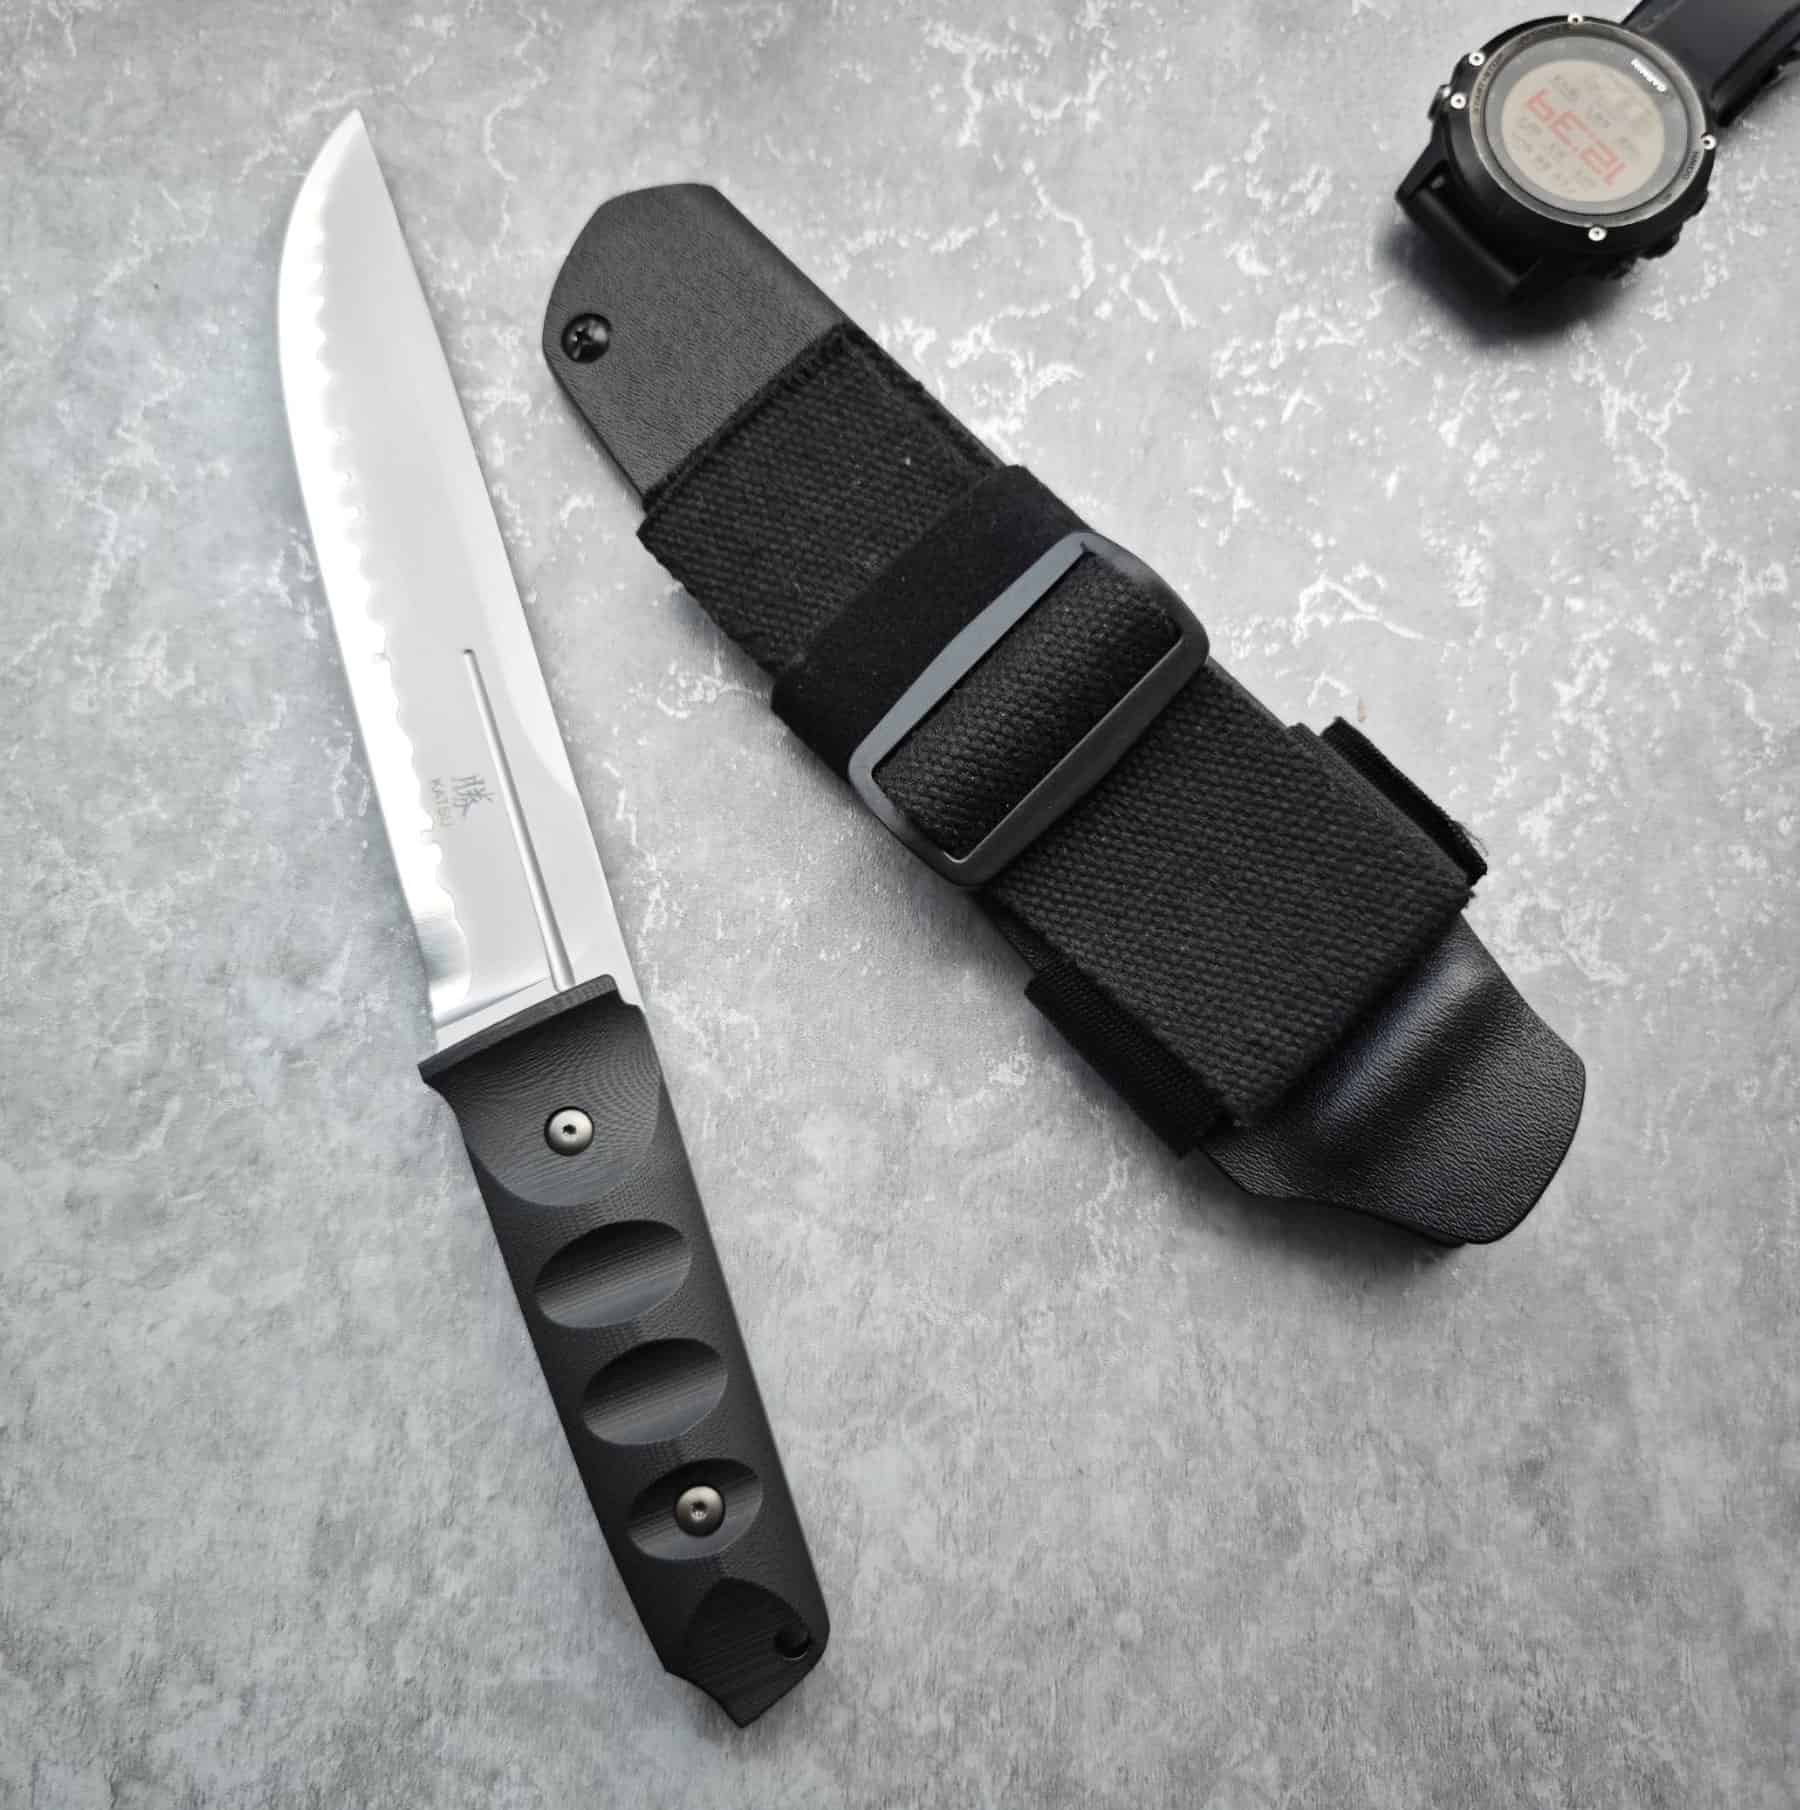 The FB01 marks a new direction for Katsu as it is the first outdoor fixed blade the company has manufactured.